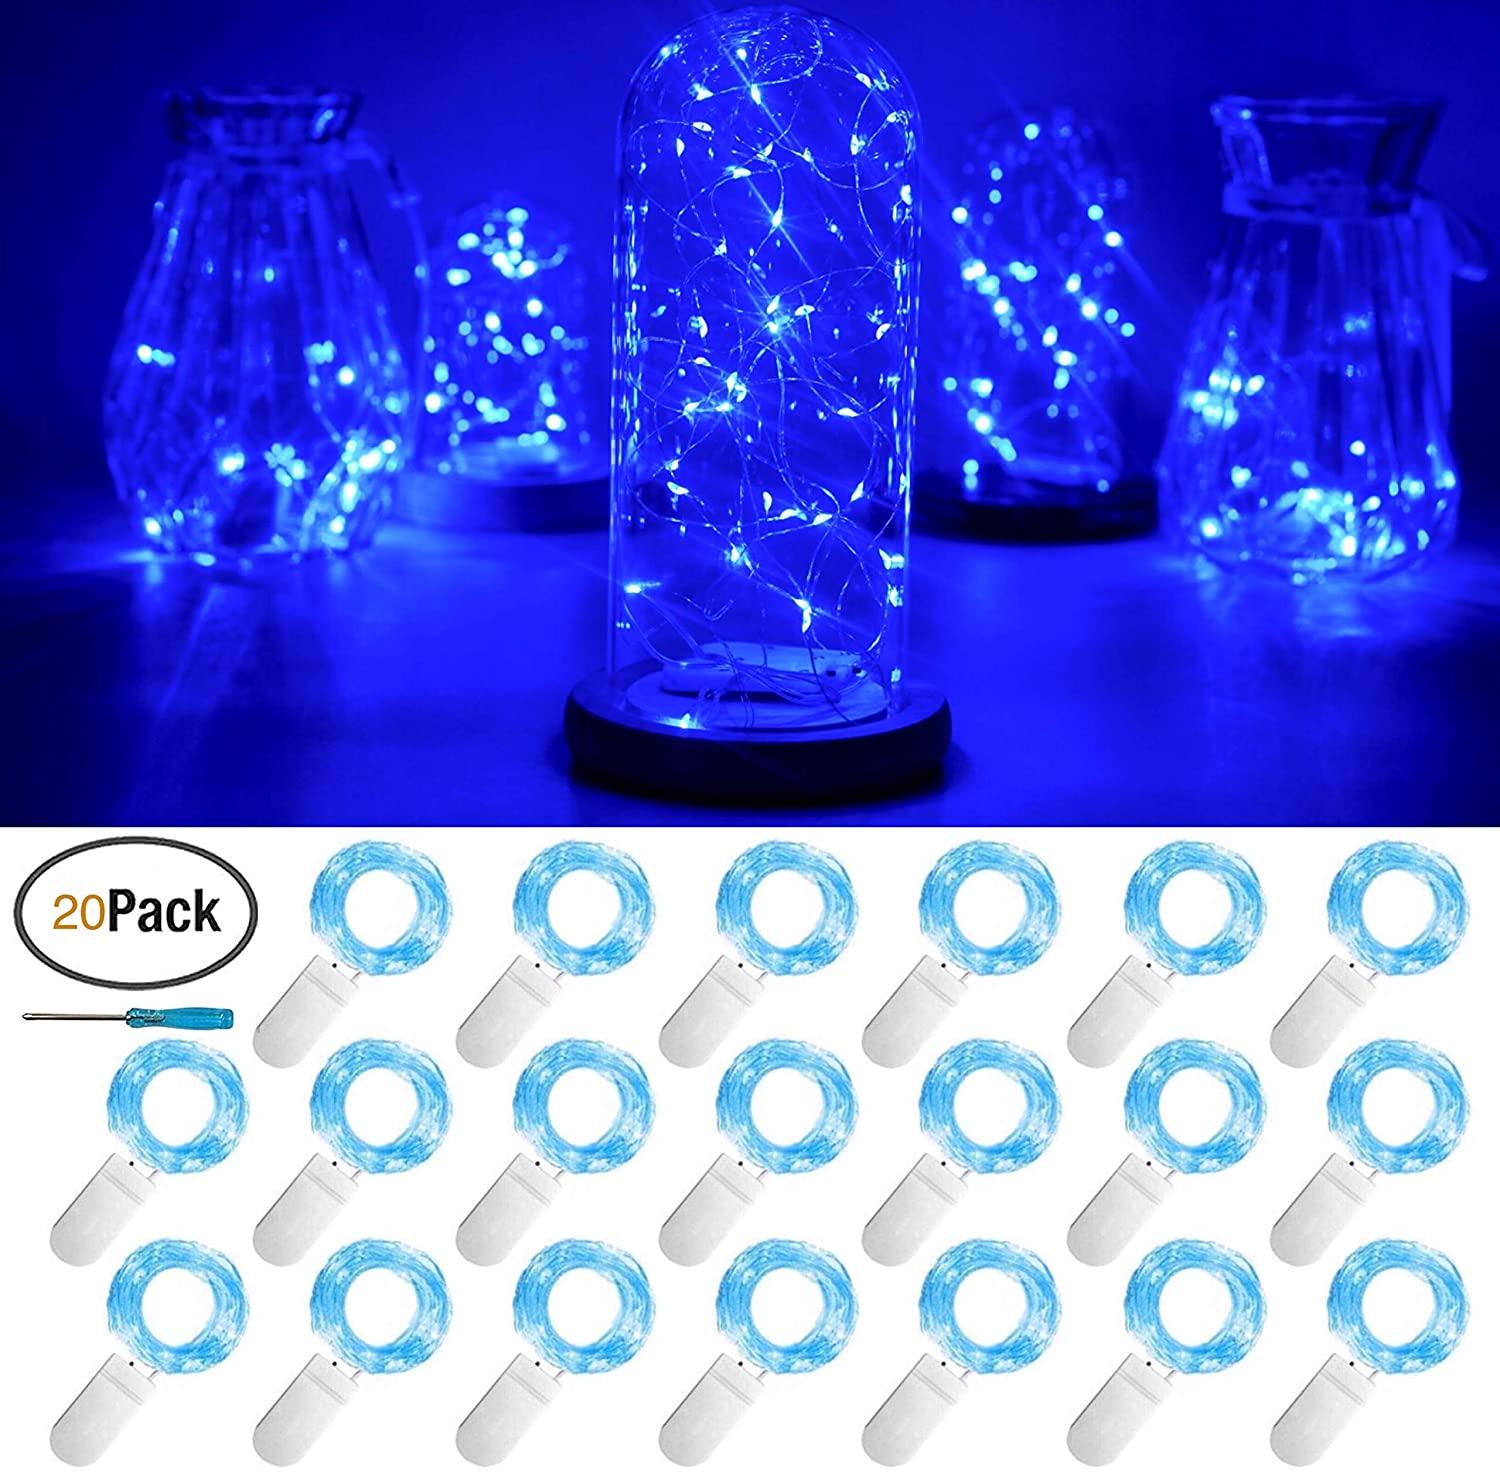 20 Packs 6.6FT 20 LEDs Battery Operated Fairy String Lights for DIY Party Christmas Costume Wedding Easter Table Decorations - If you say i do